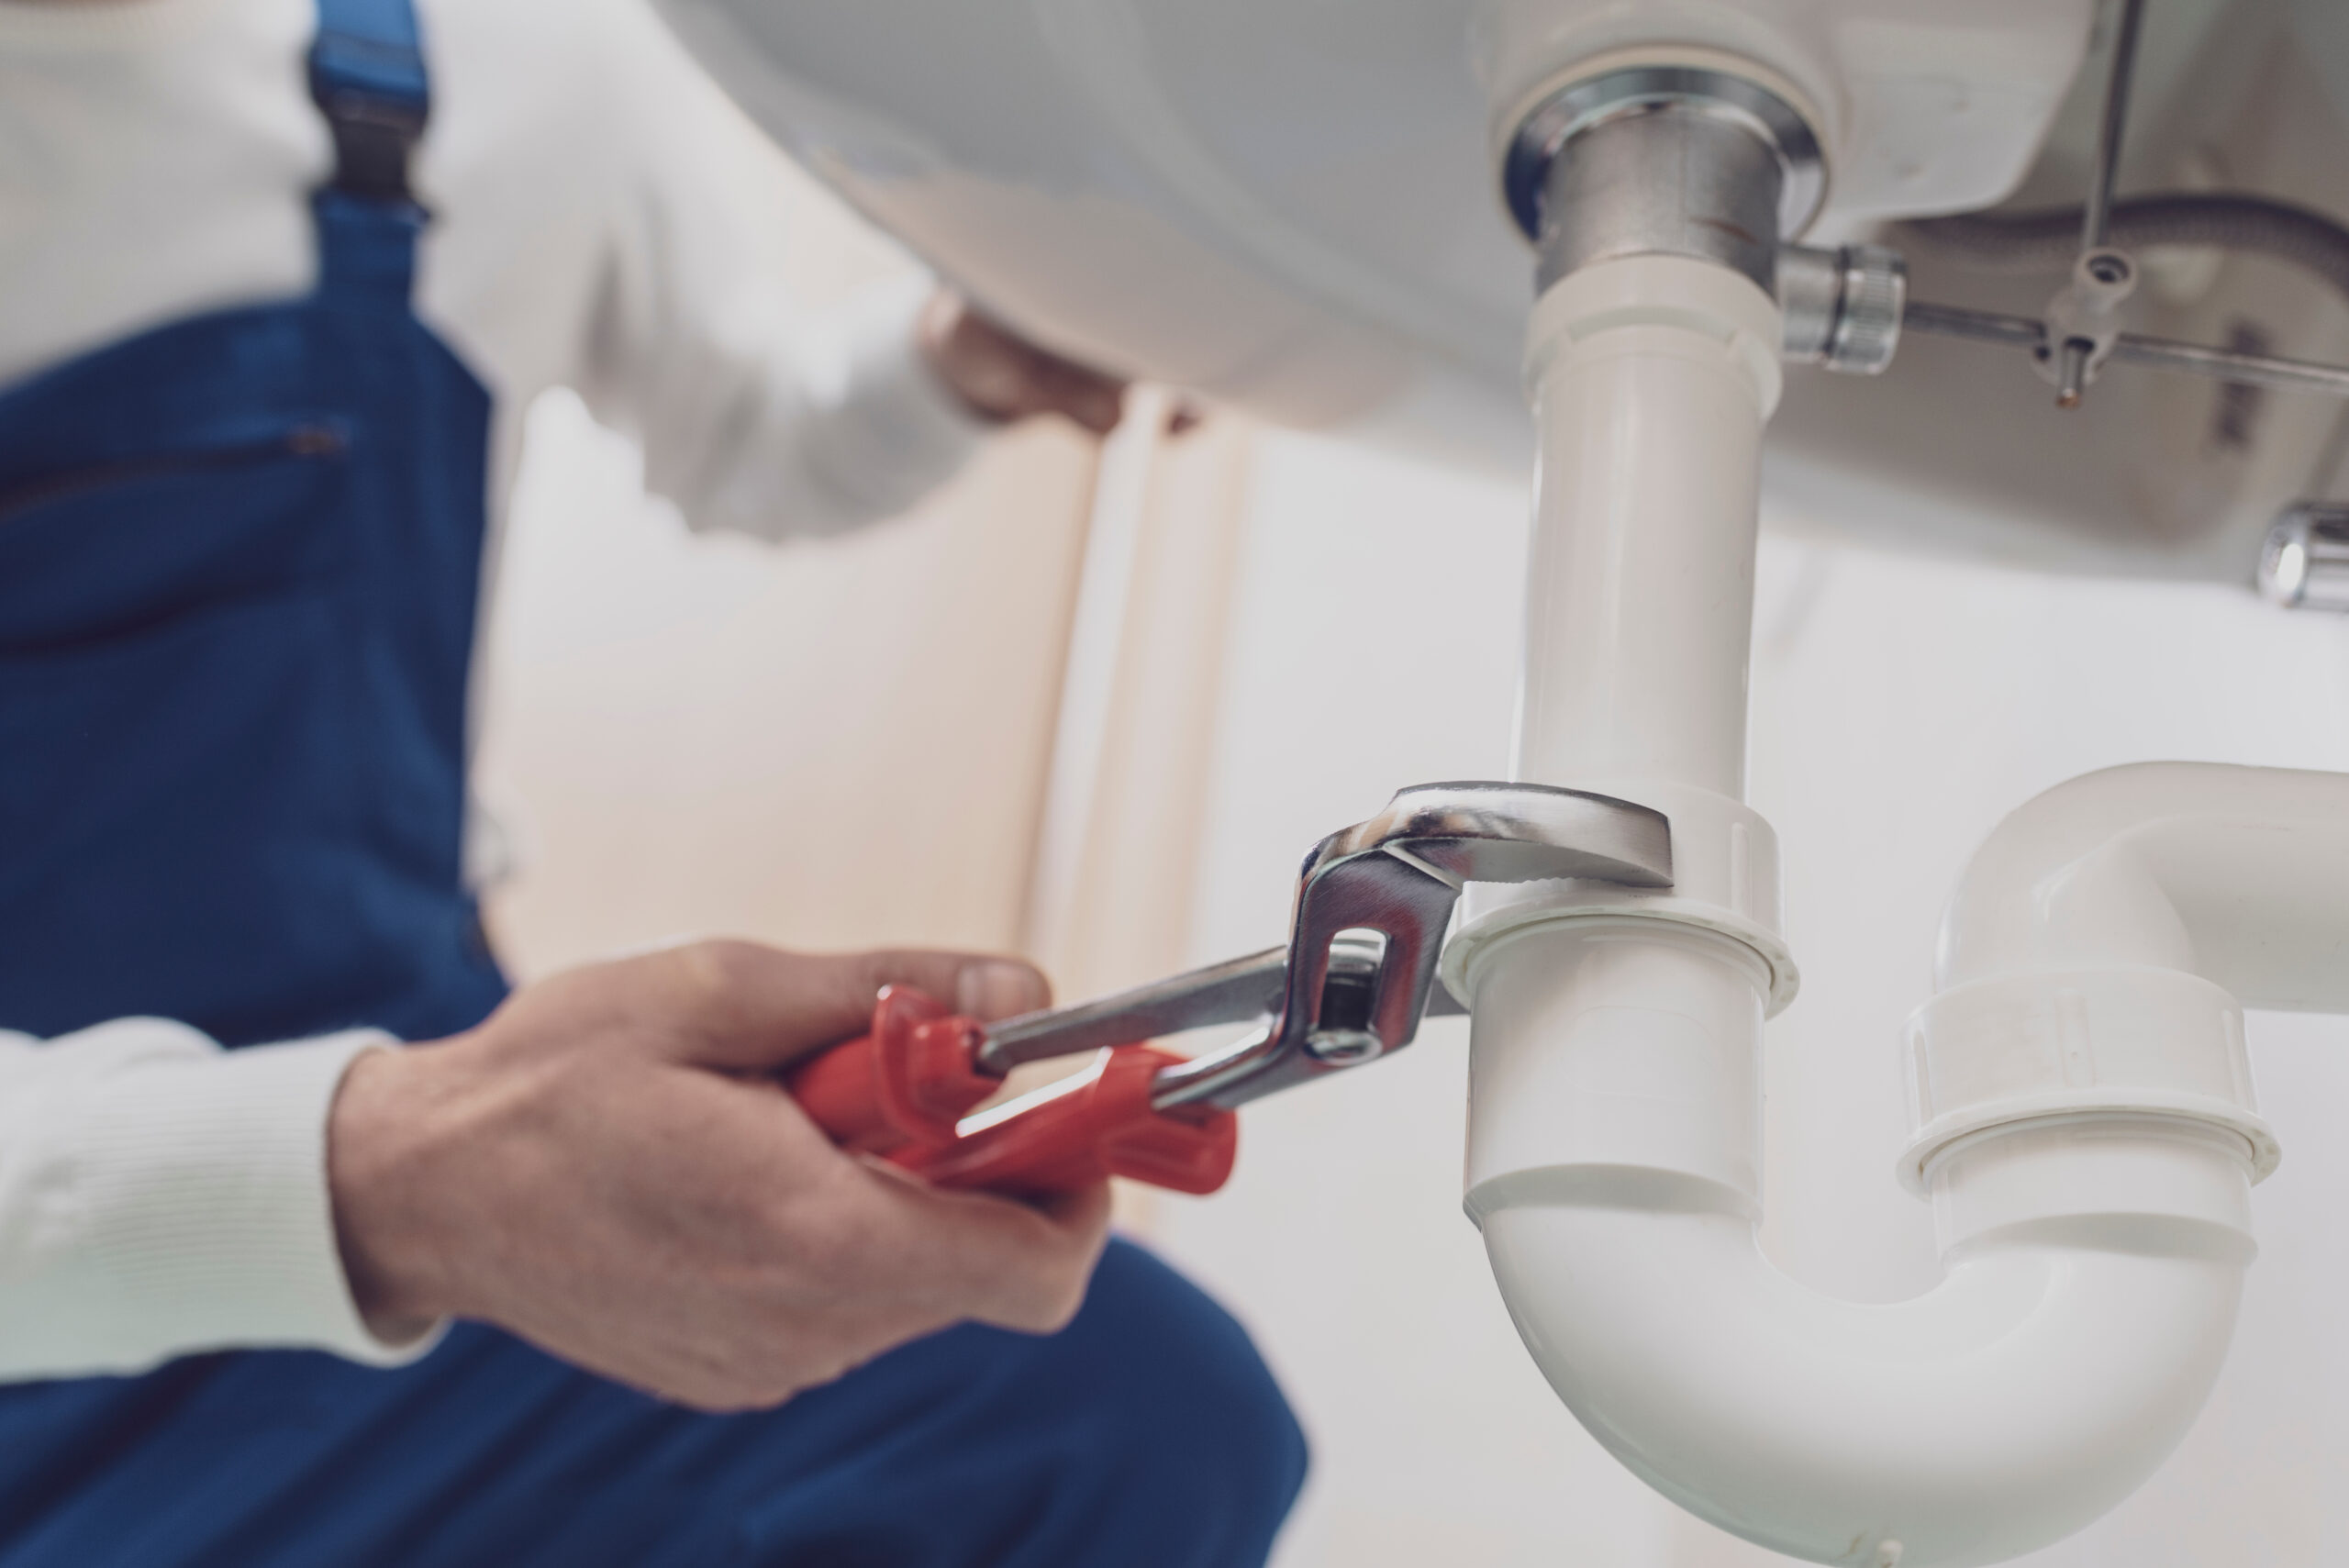 Professional plumber installing or fixing a sink at home